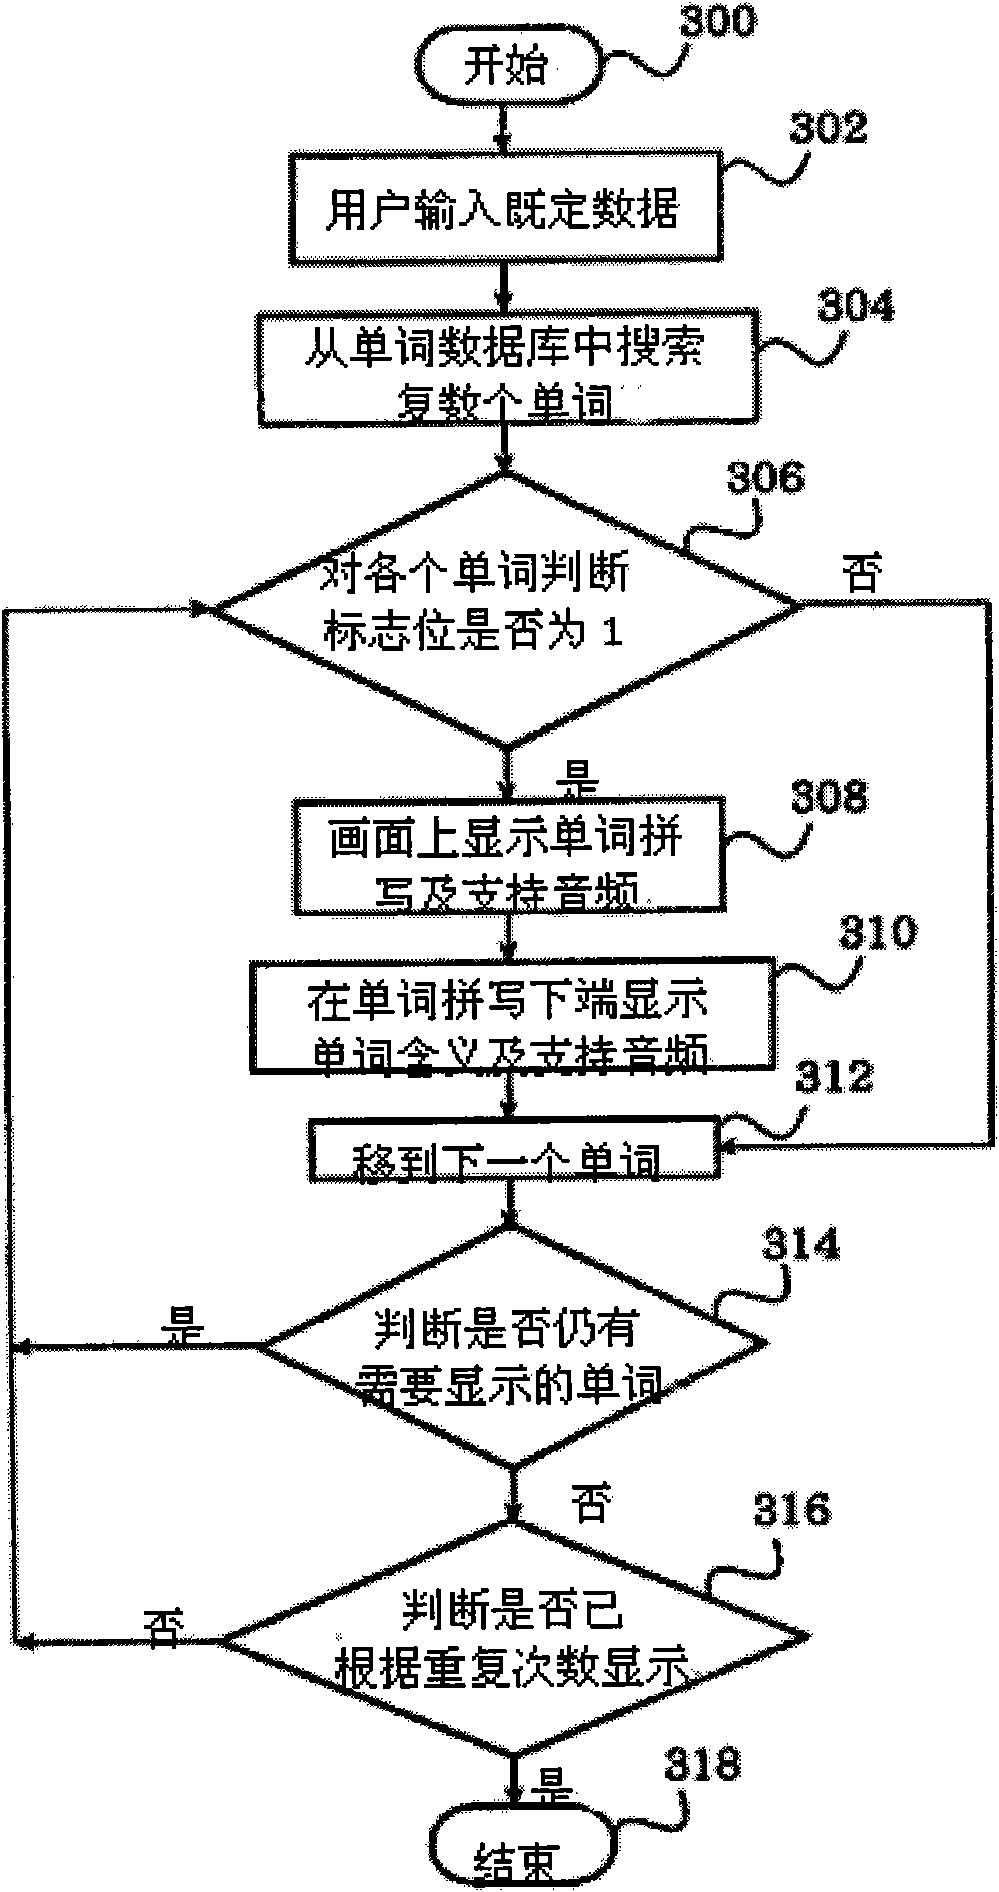 Method and device for searching and displaying data